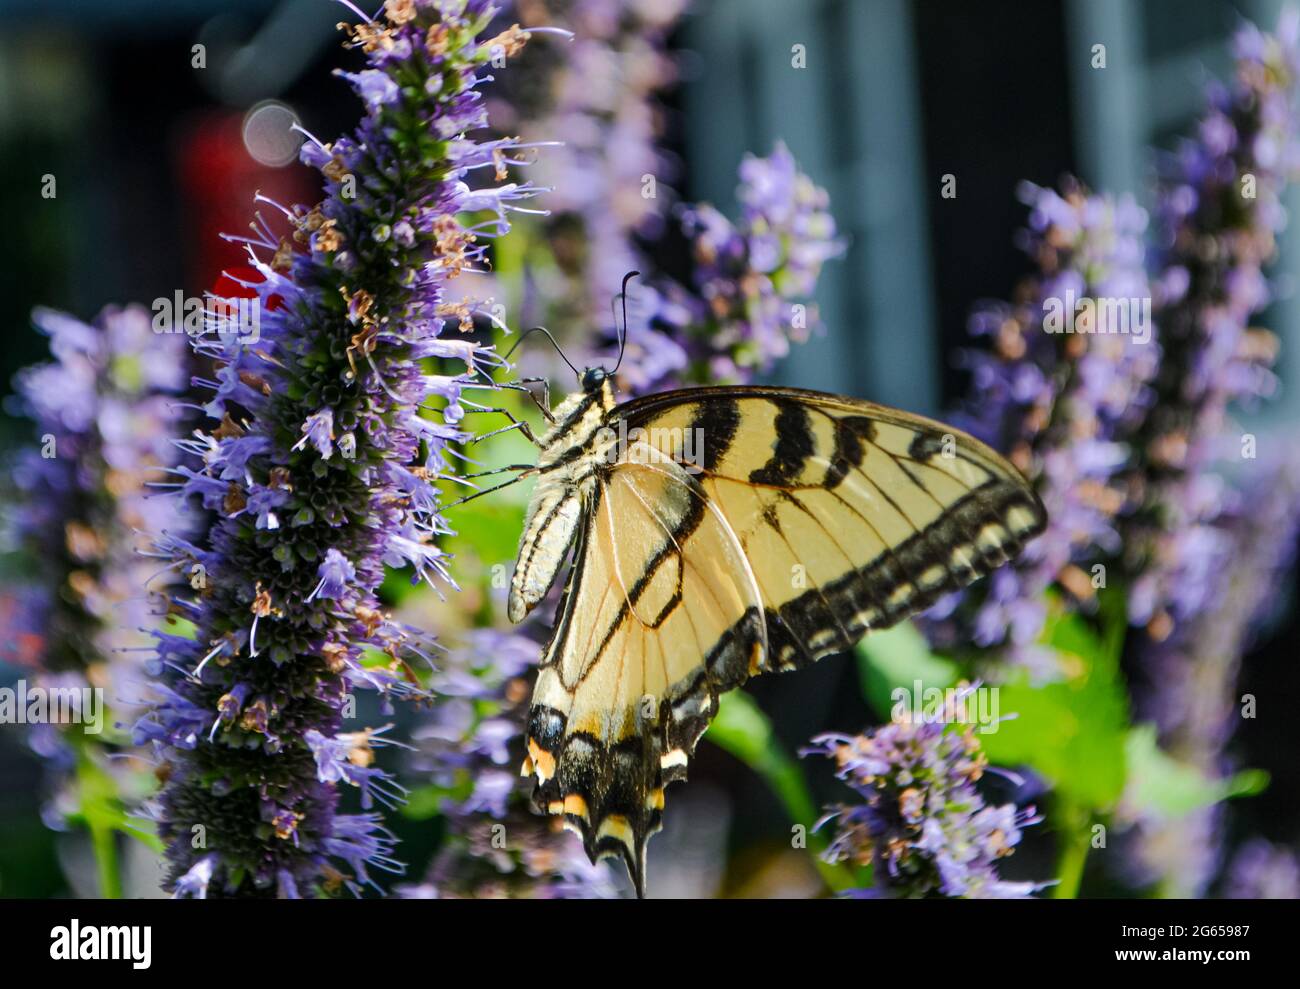 An Eastern Tiger Swallowtail (Papilio glaucus) with wings closed feeds on Anise Hyssop (Agastache foeniculum). Closeup. Copy space. Long Island, NY. Stock Photo